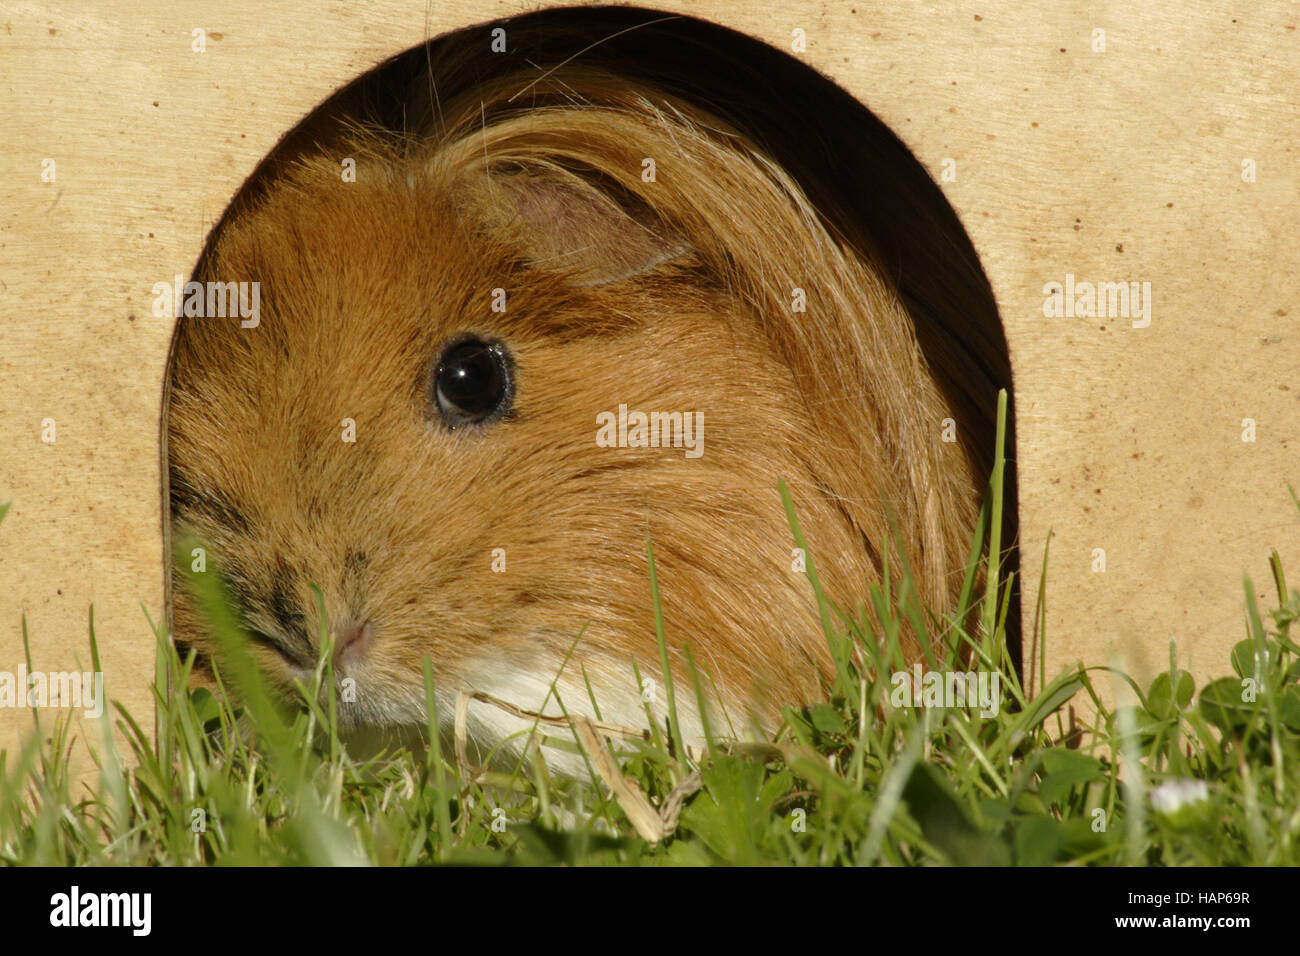 Hauschen High Resolution Stock Photography and Images - Alamy